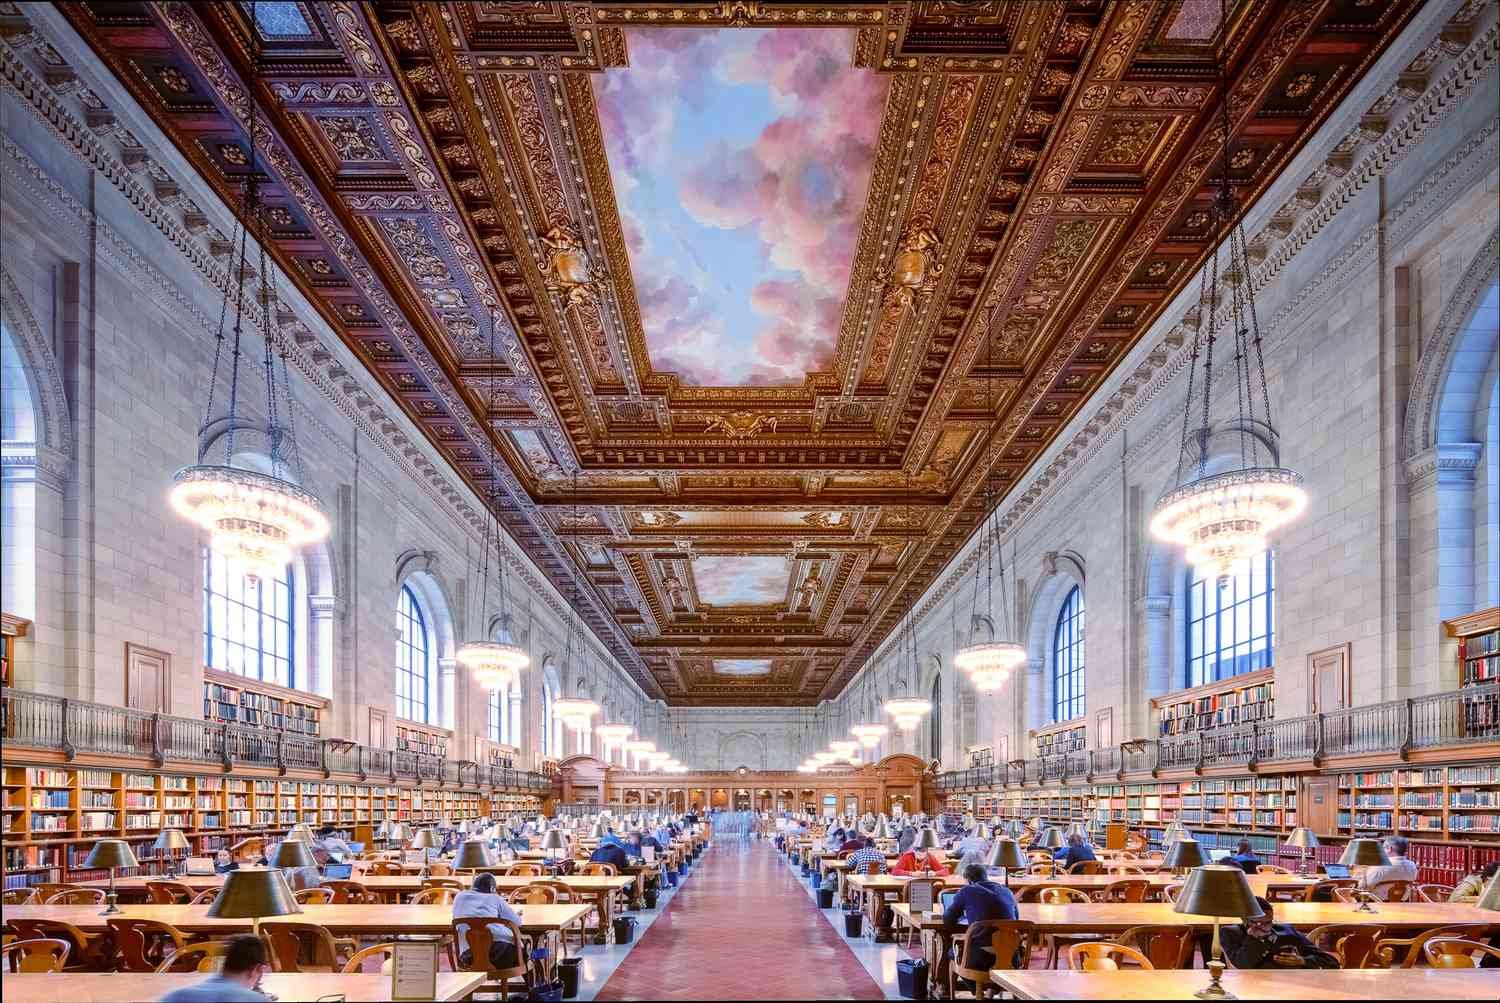 The 20 Most Beautiful Libraries in the World